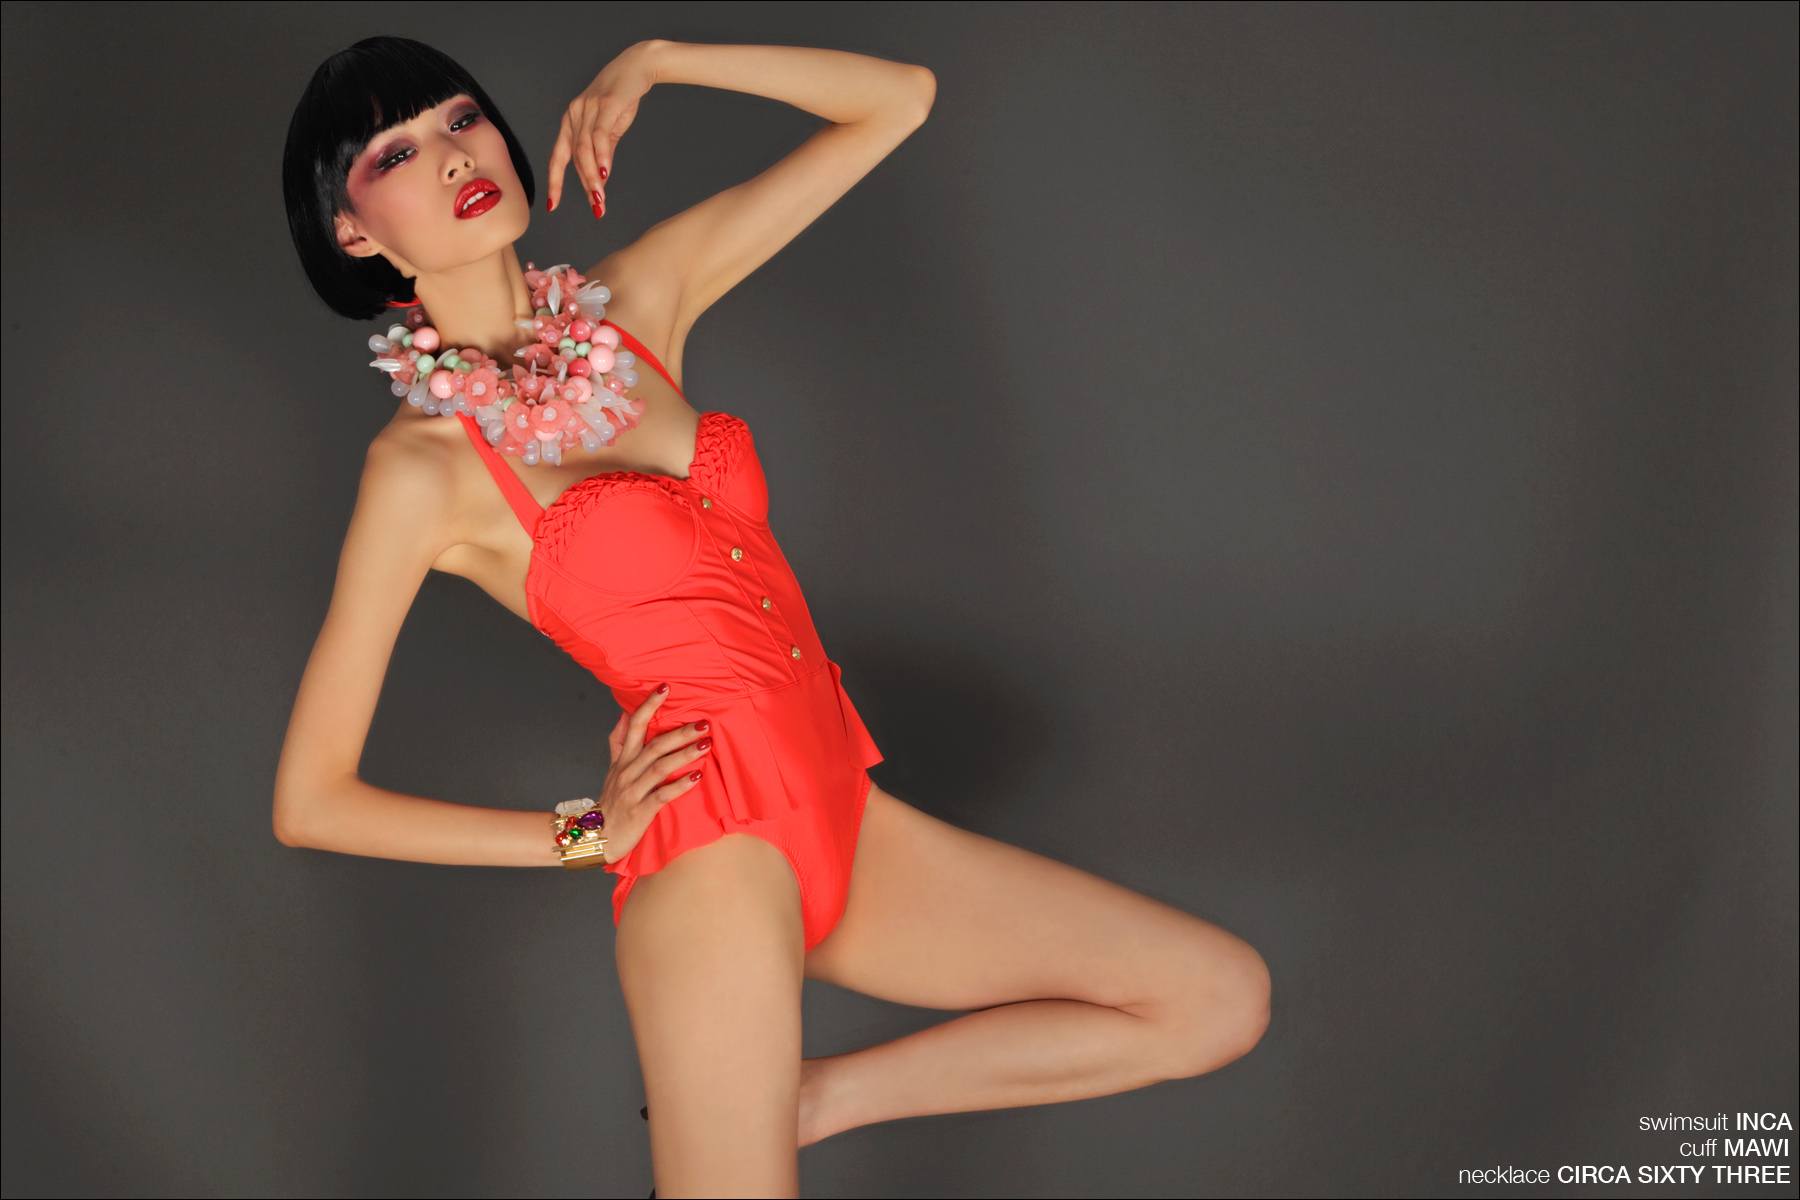 One piece swimsuit photographed by Alexander Thompson, modeled by Meng Meng for Ponyboy Magazine.